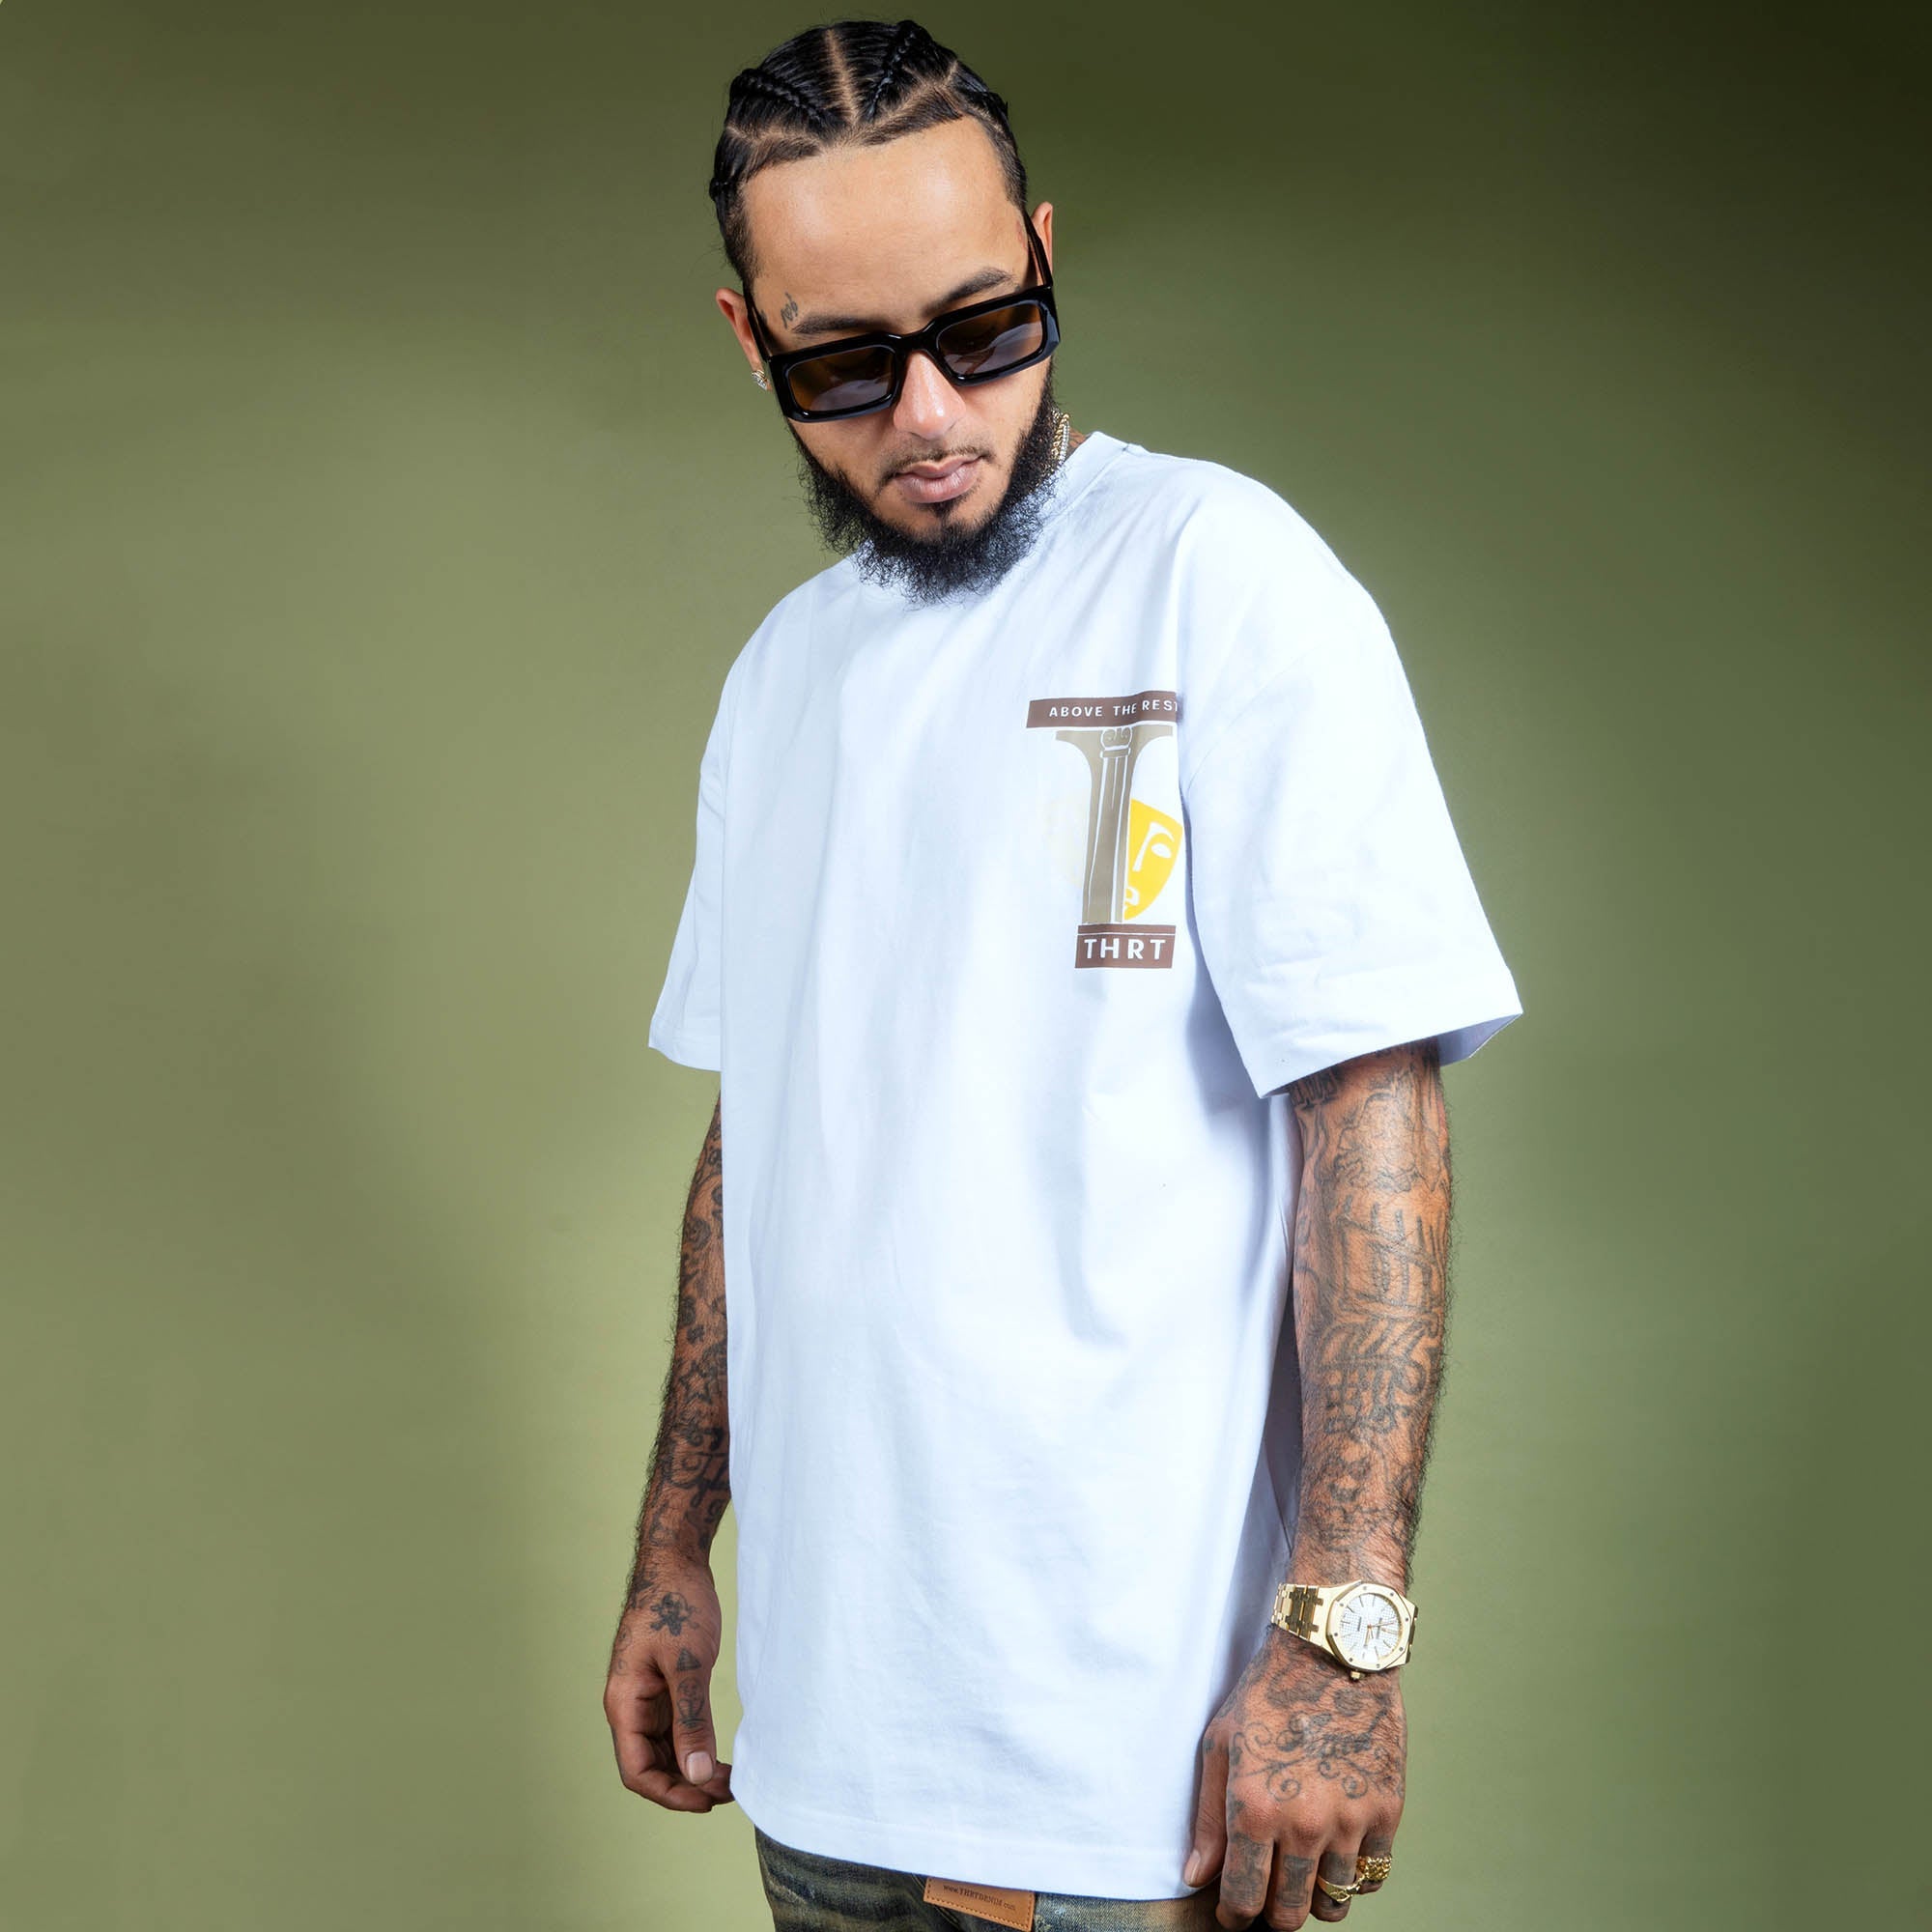 Mask LUX Heavy Weight Tee - White